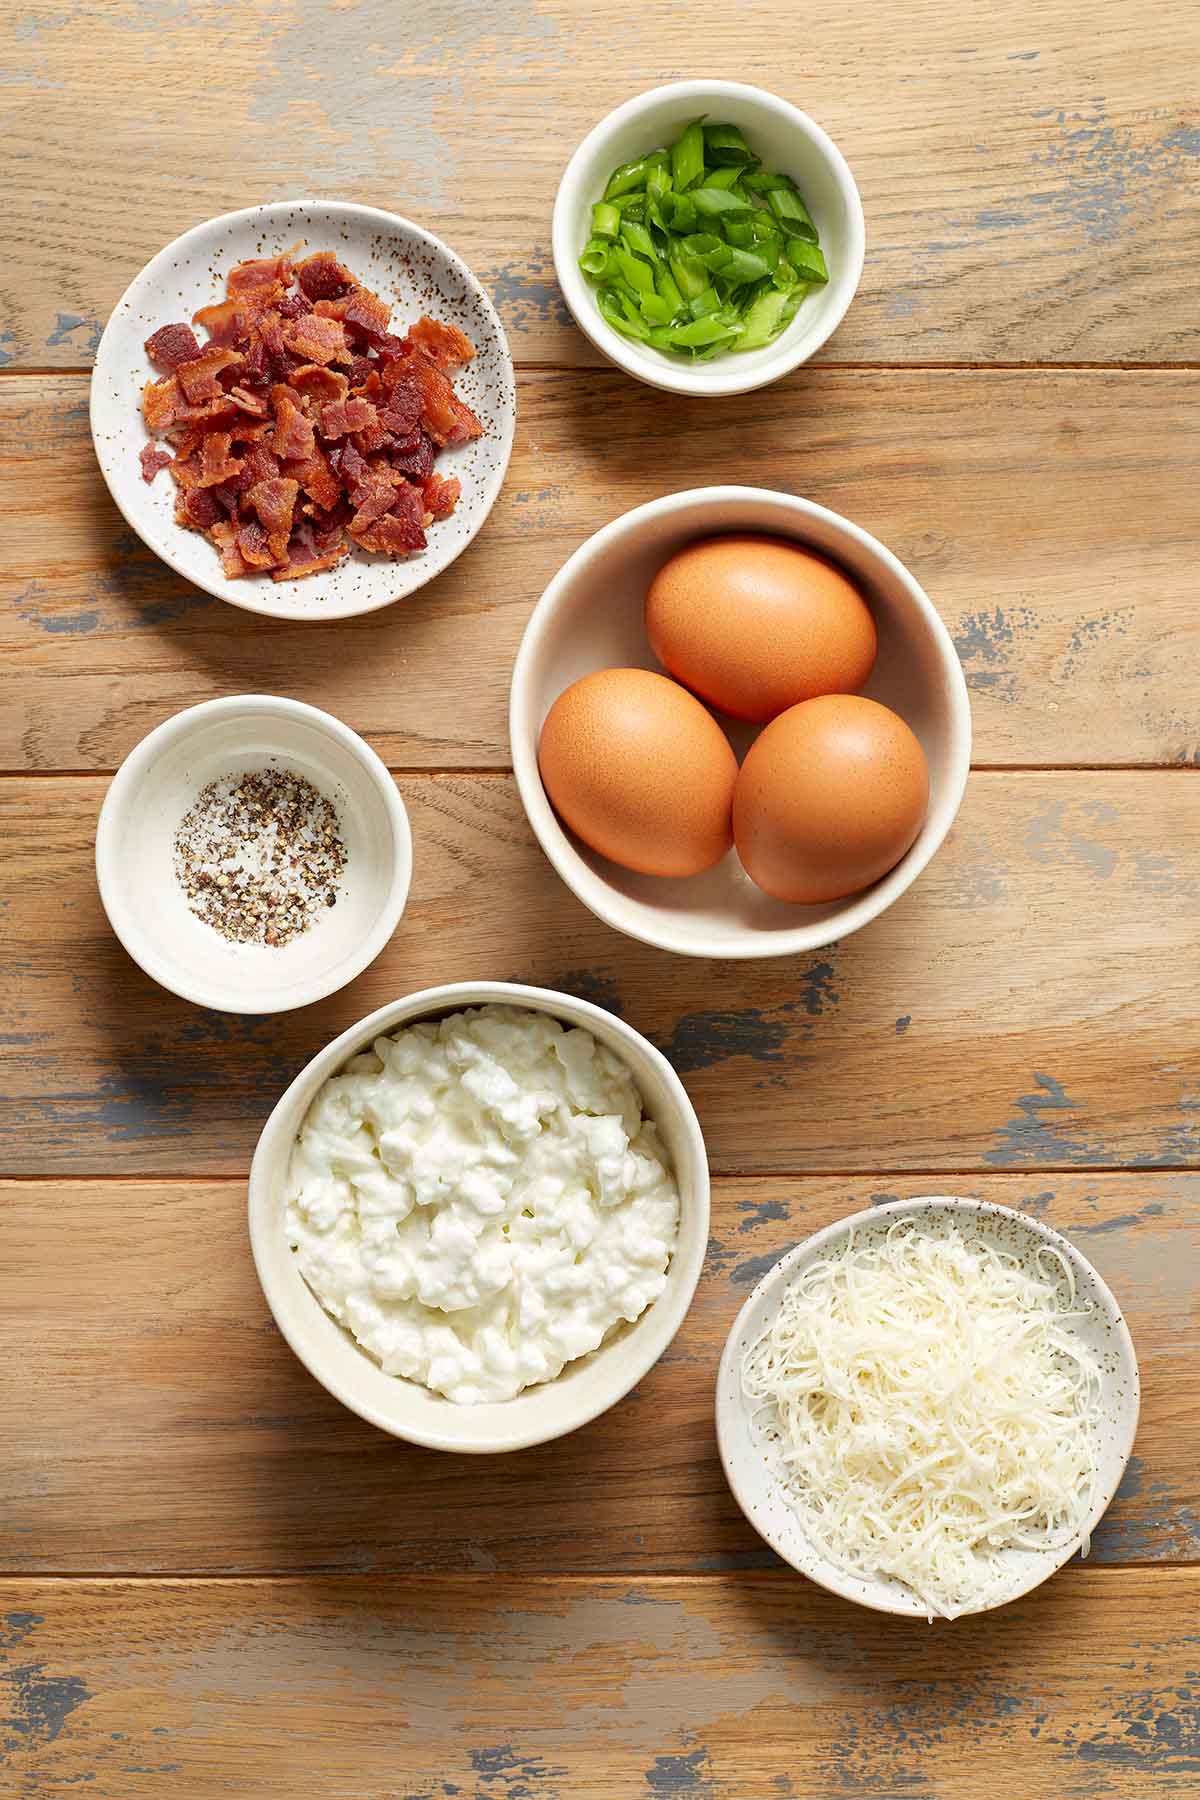 Ingredients to make air fryer egg bites arranged in individual bowls on a wooden surface.